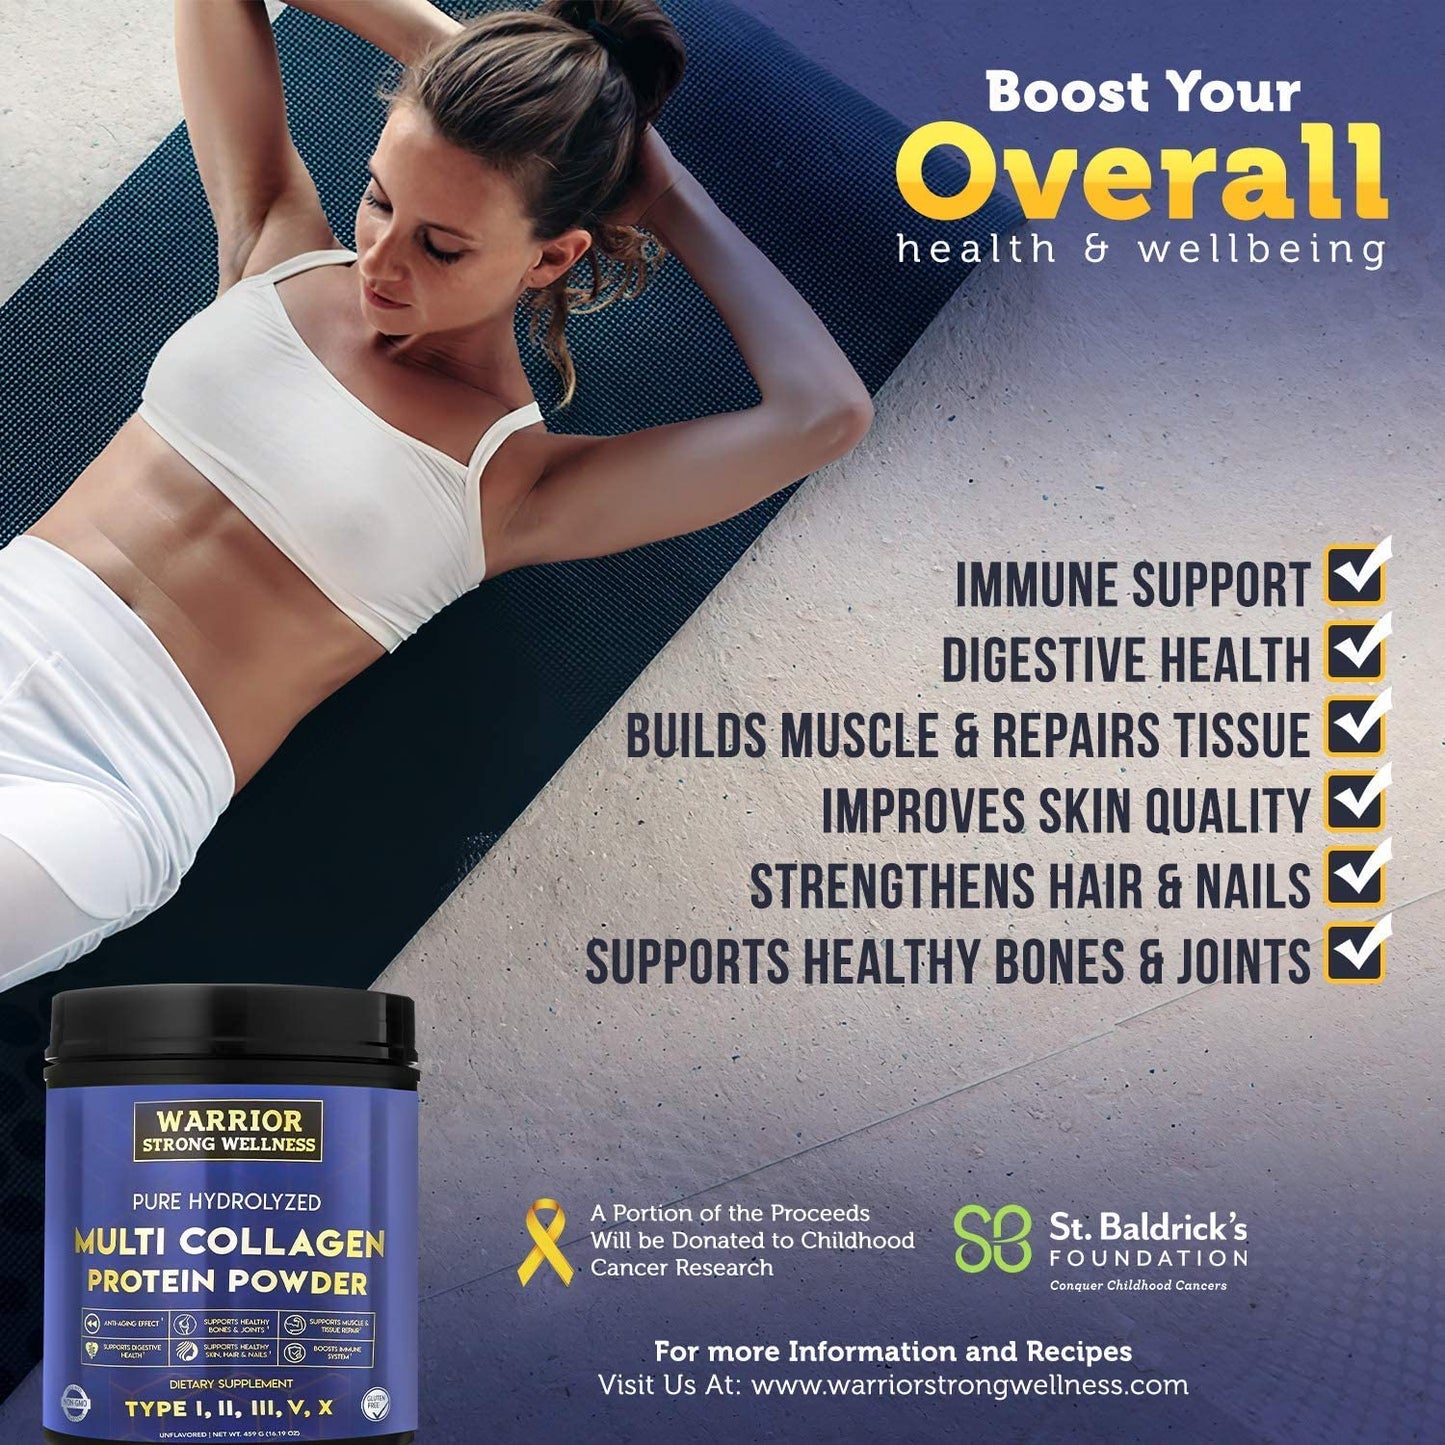 Strengthen Your Joints, Hair and More with the Best Collagen Peptides